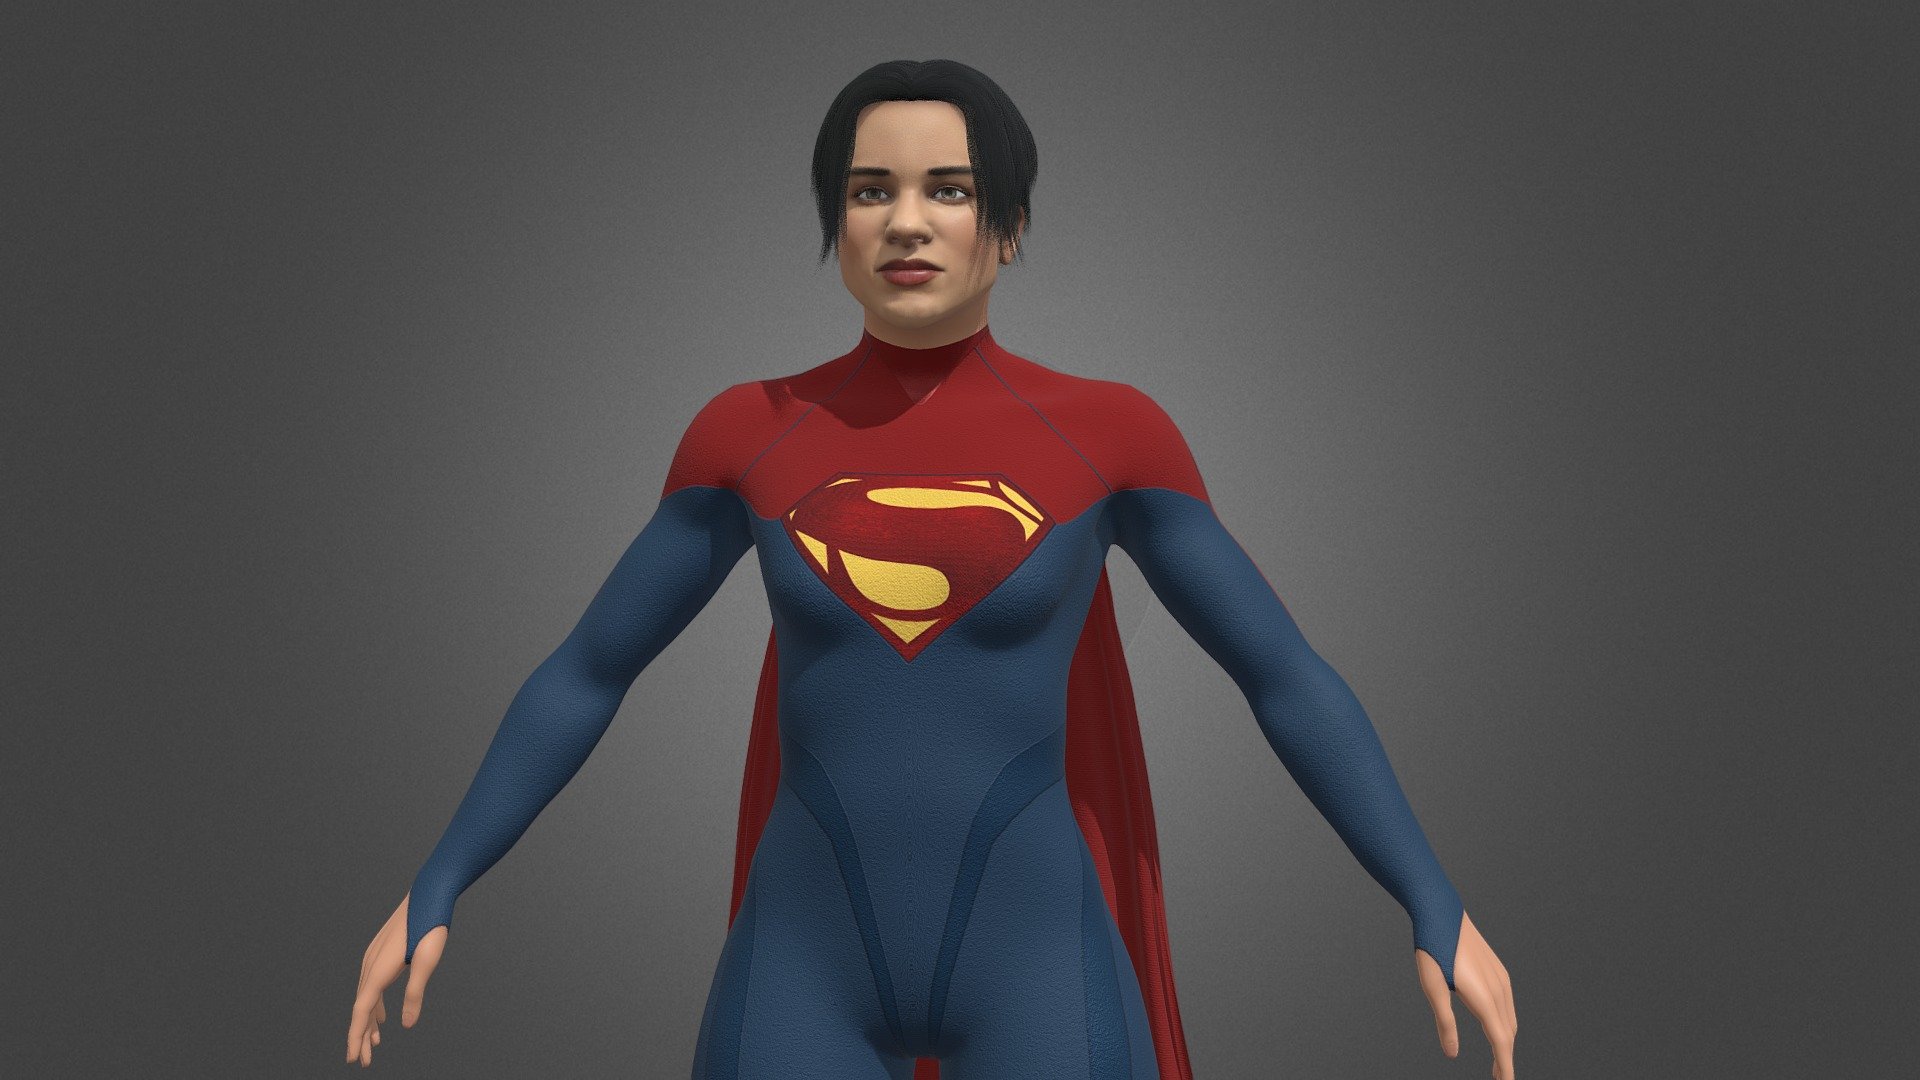 -Supergirl played by Sasha Salle in the new movie The flash

-3 materials used in total

-80396 polygons

-no mouth, no teeth, no tongue

-no rigged - Supergirl Sasha Calle - Buy Royalty Free 3D model by wilsonghm99 3d model